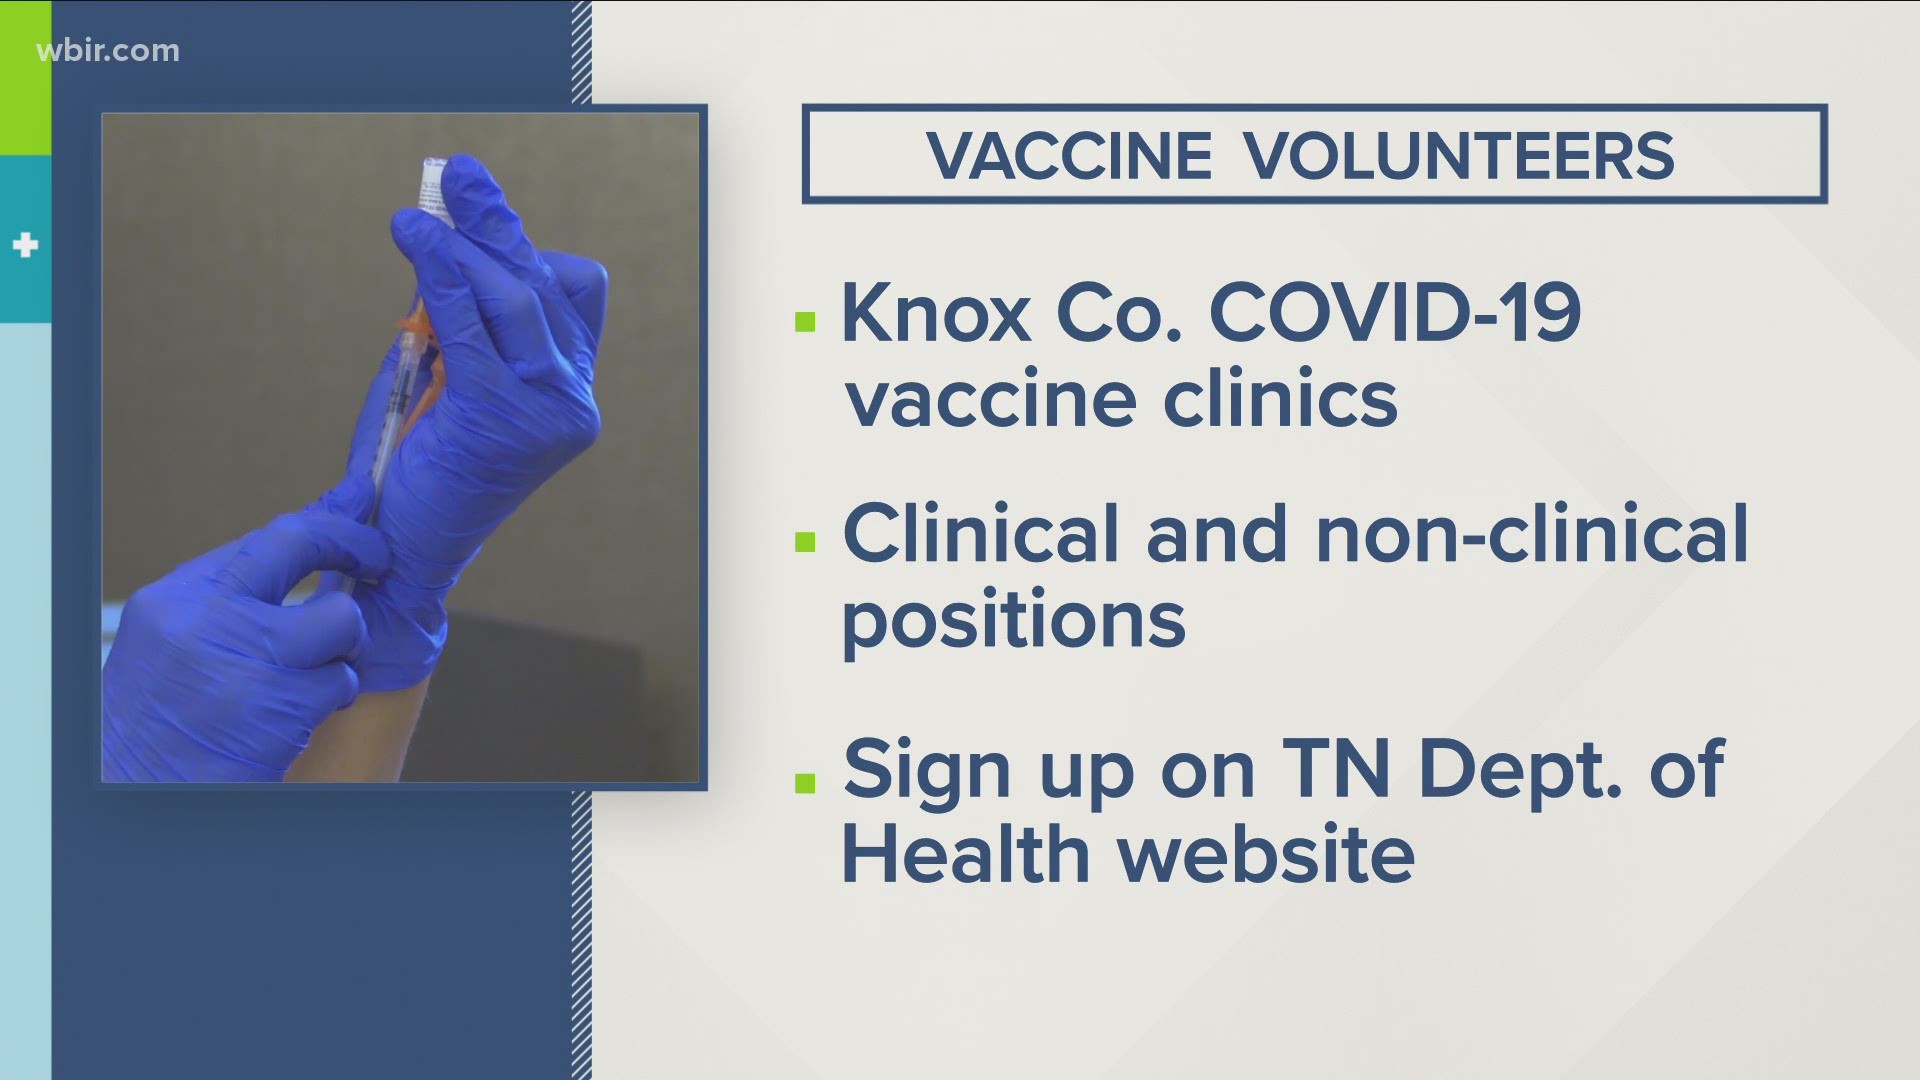 Officials said that they are looking for medical and non-medical volunteers to help them distribute the COVID-19 vaccine.